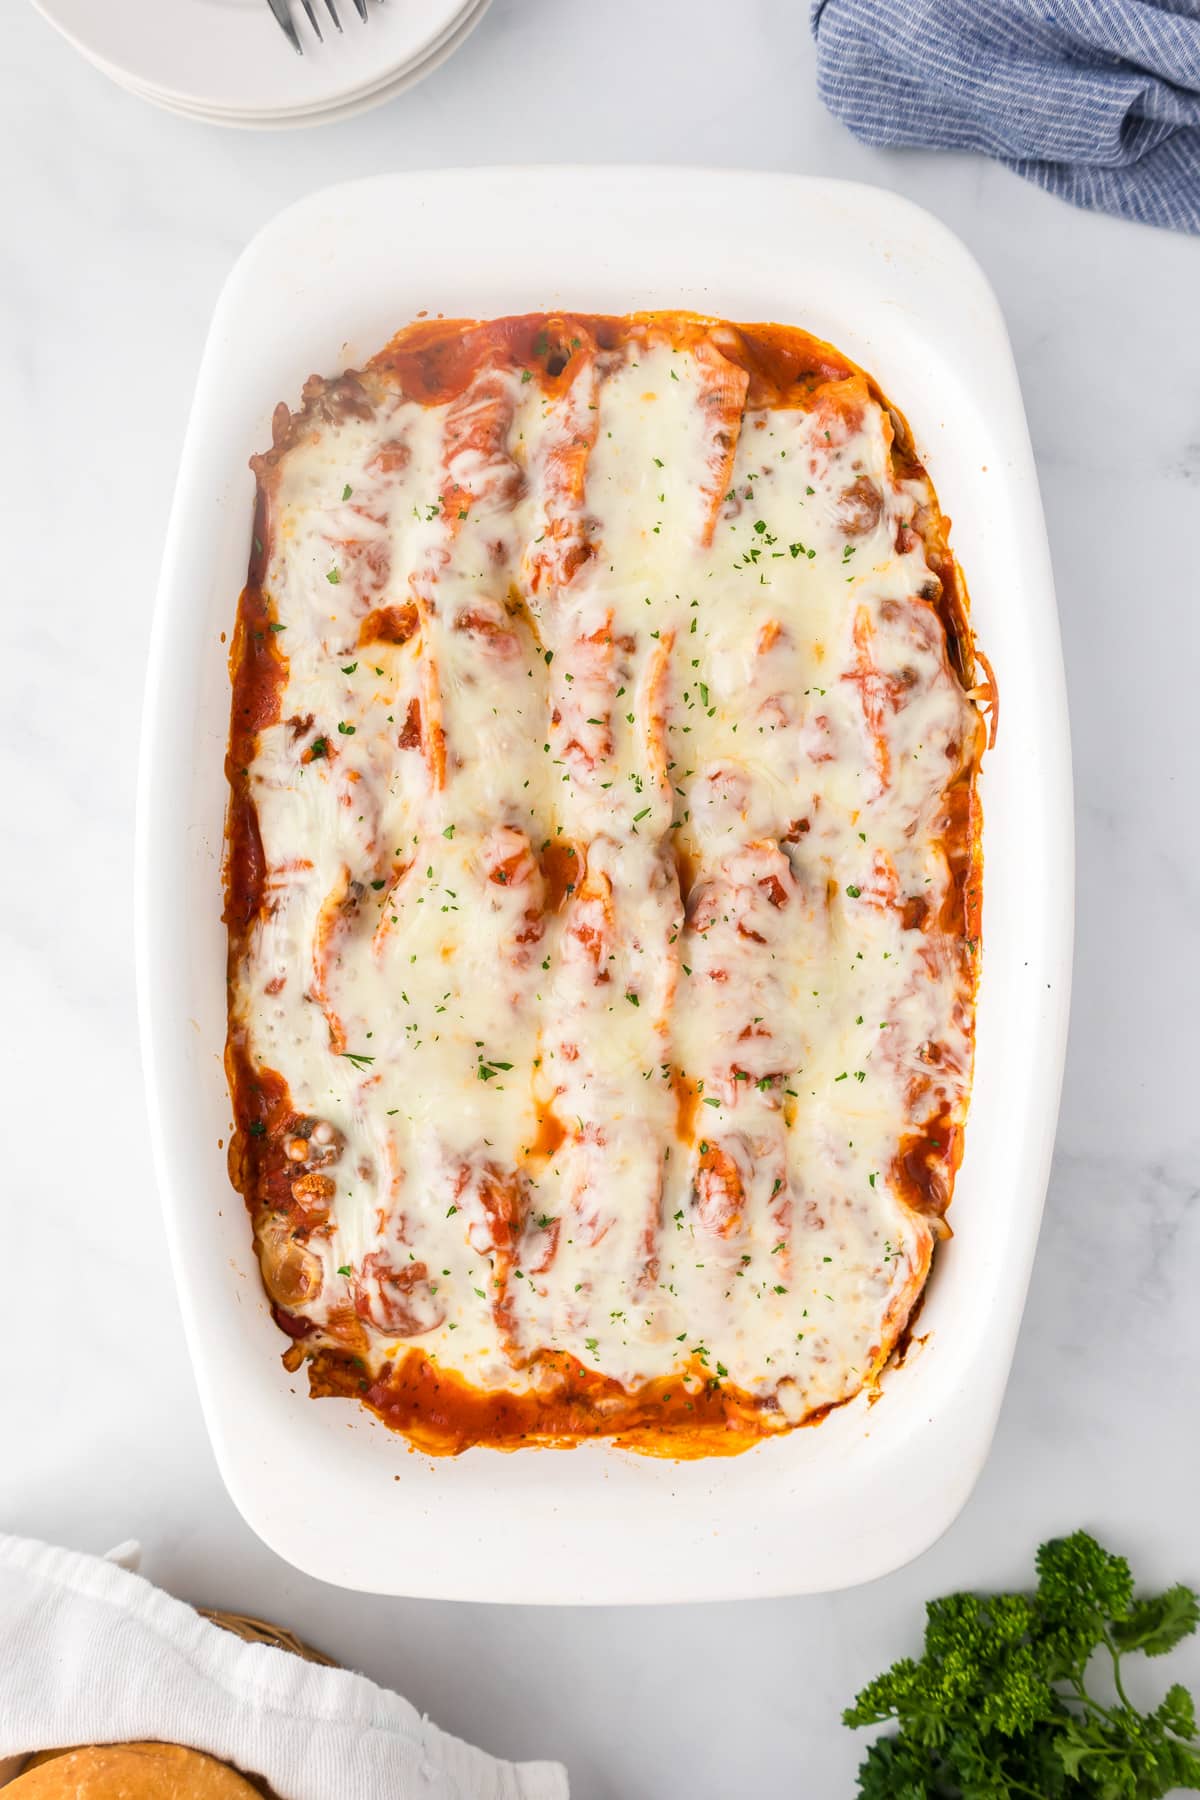 Cooked ground beef stuffed shells covered in melted cheese in a casserole dish from above.